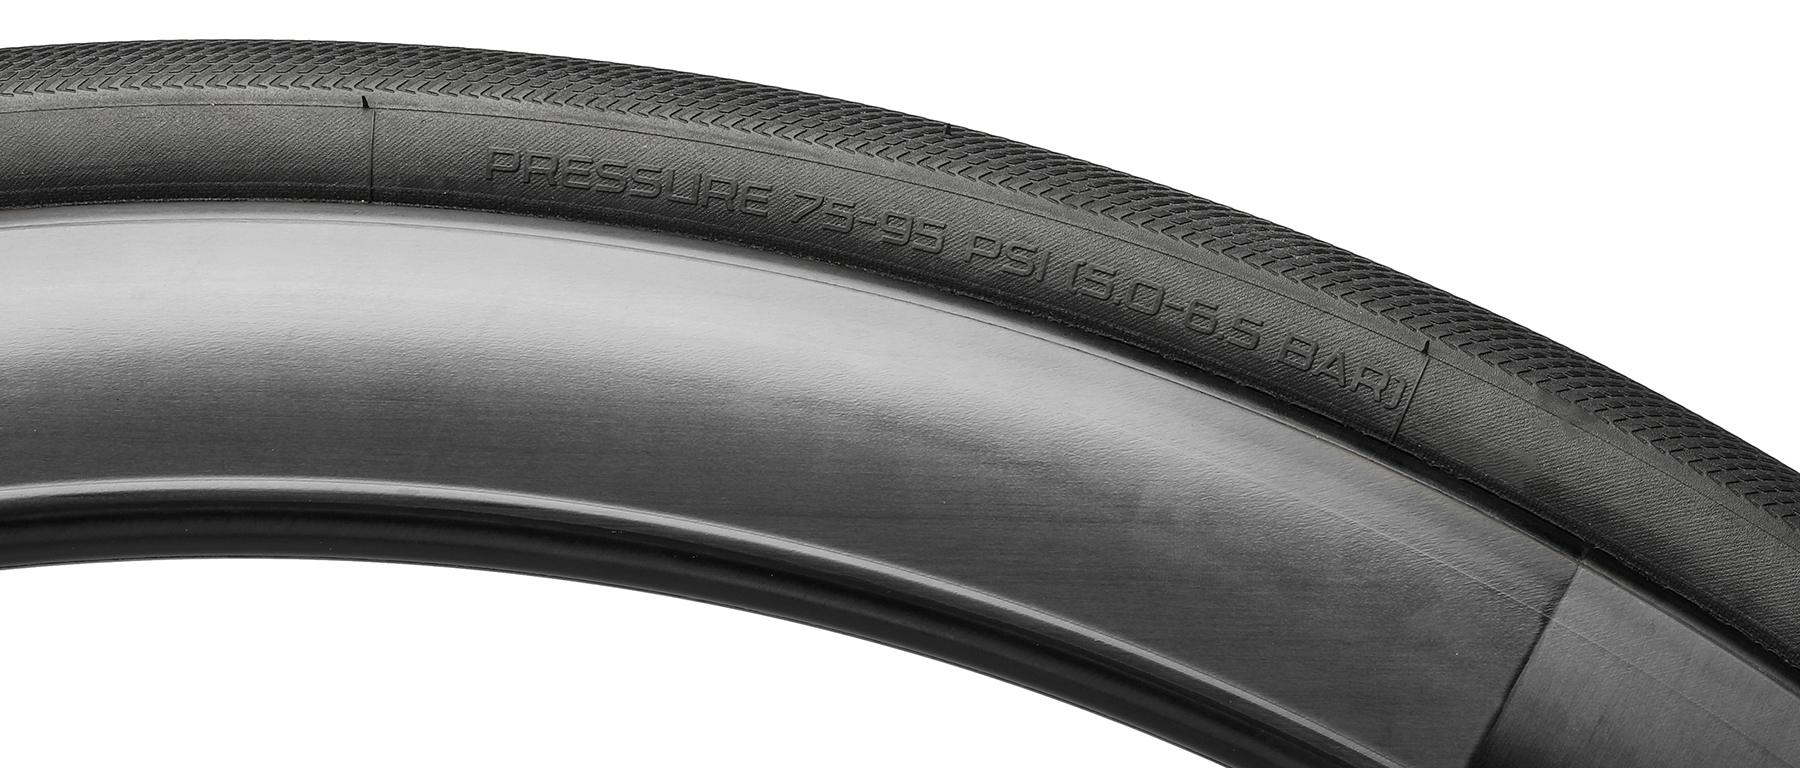 Specialized Turbo Pro T5 Road Tire